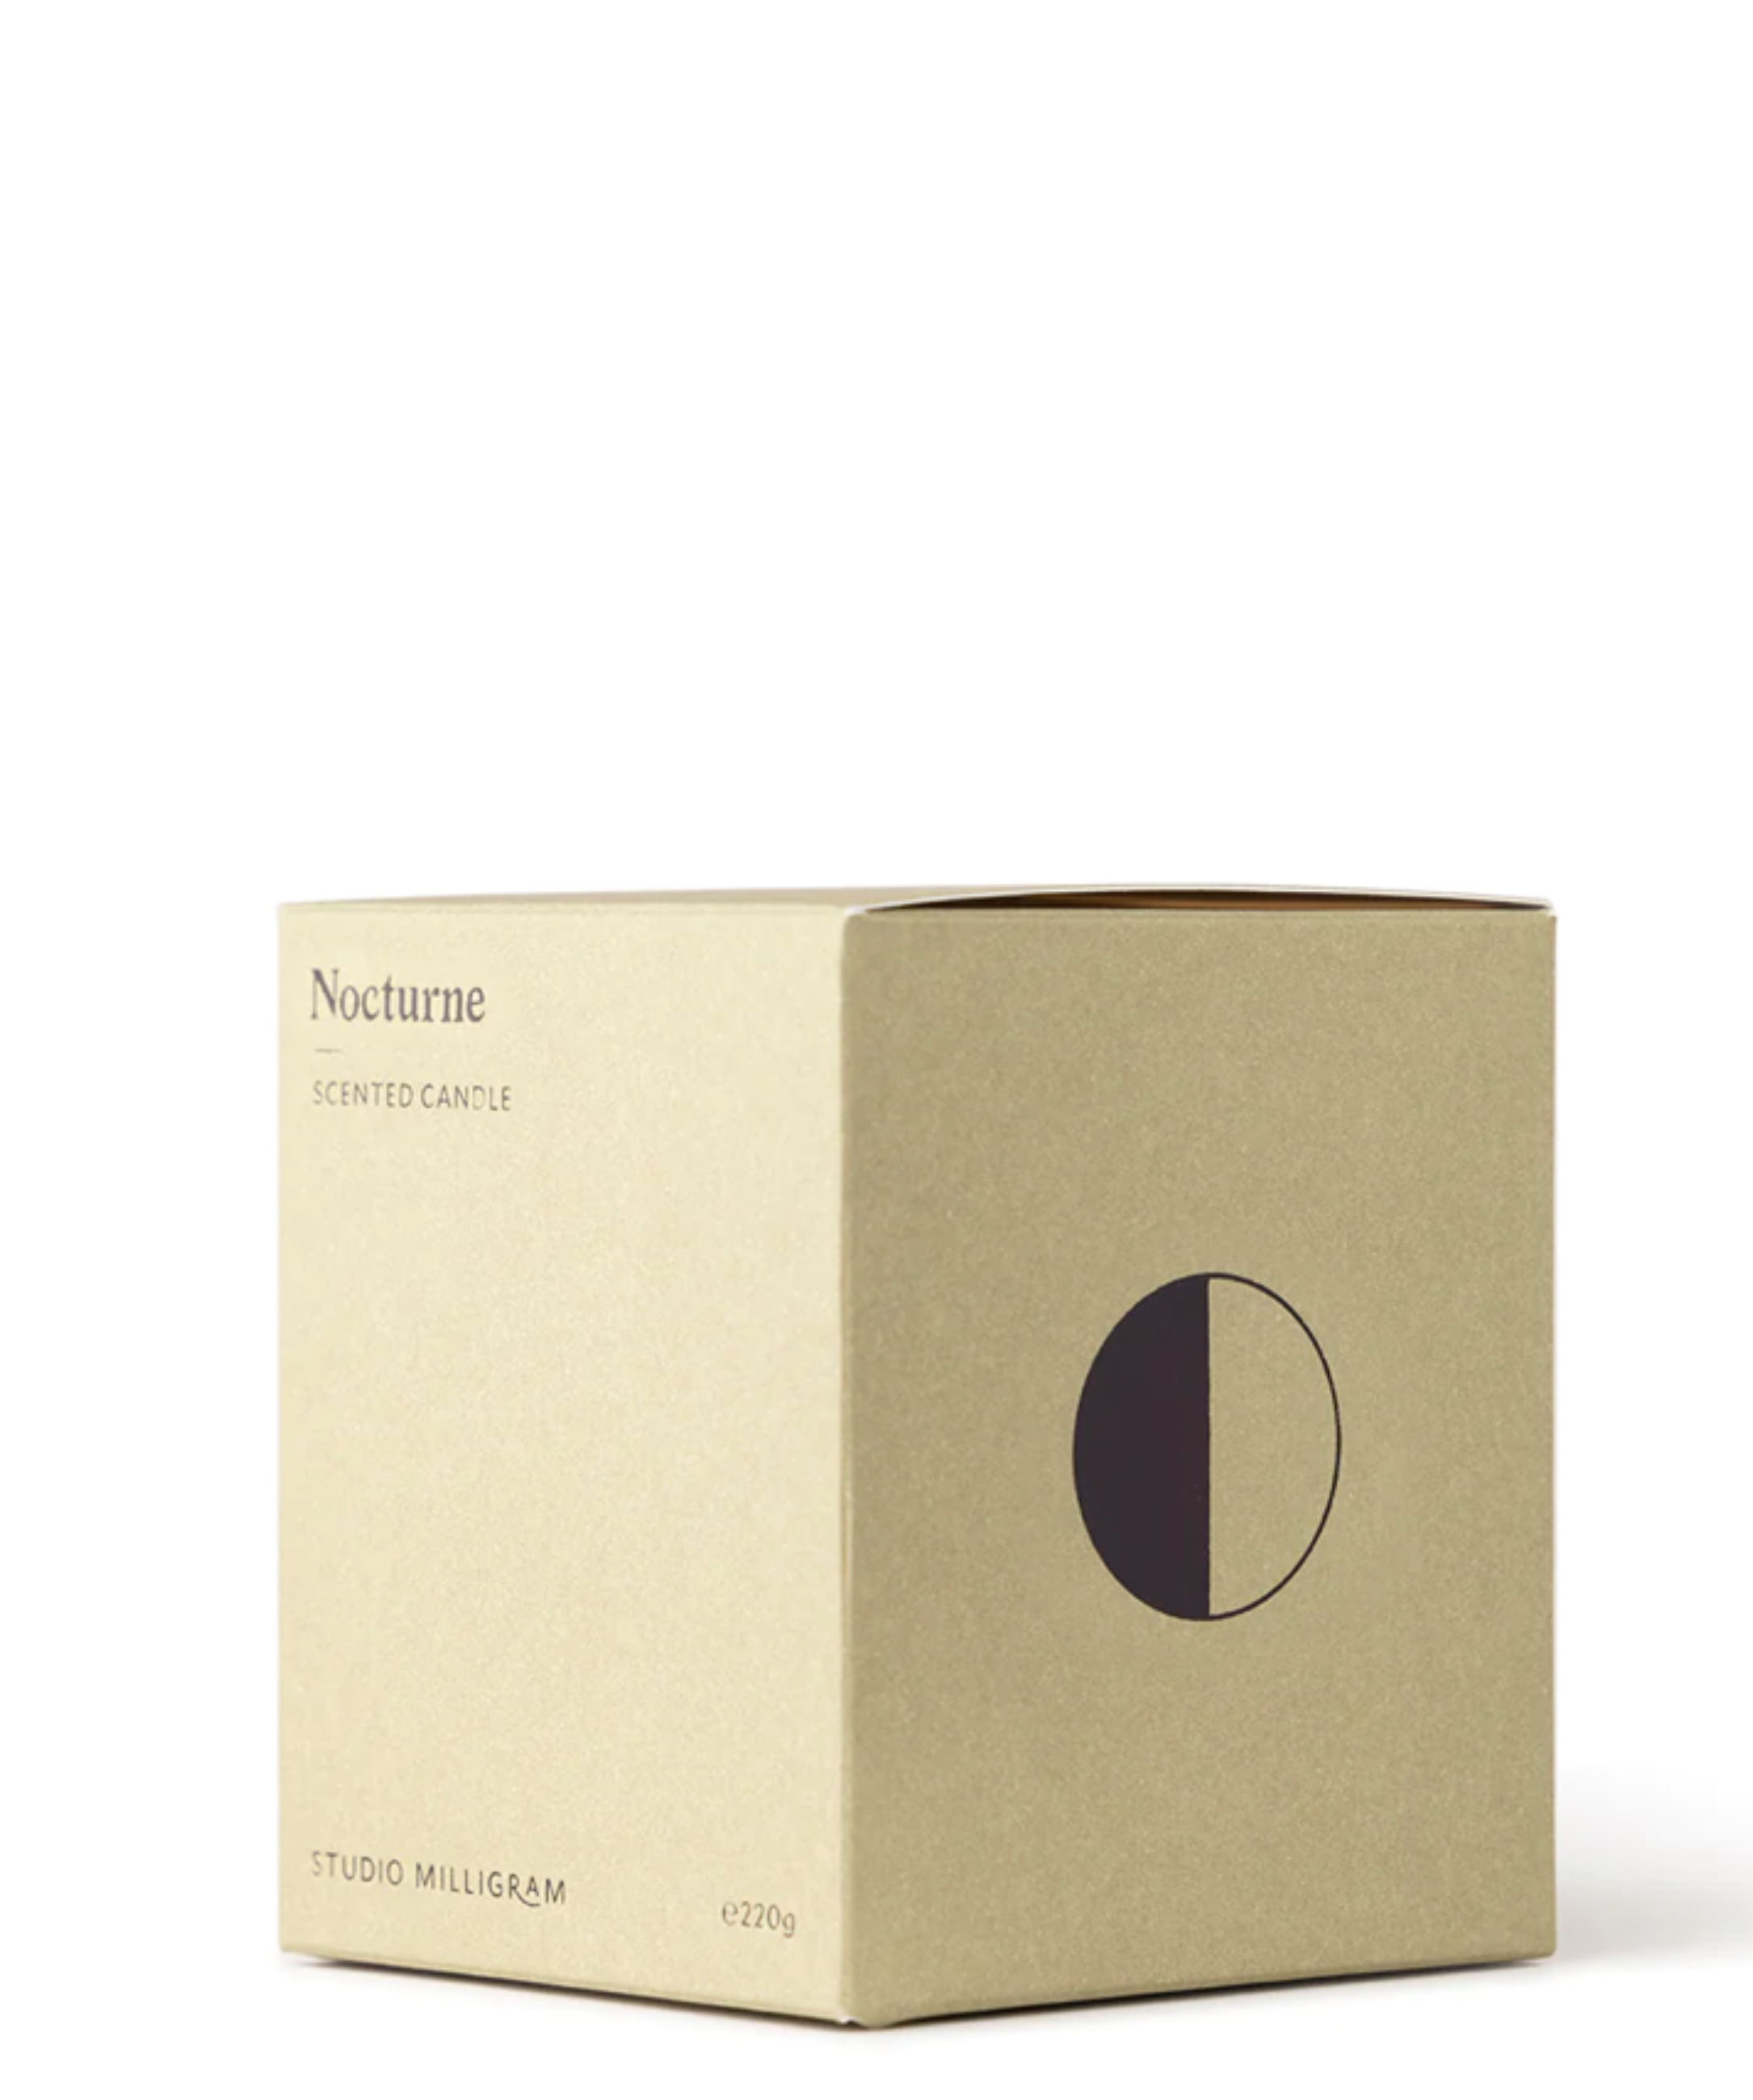 Scented Candle - Nocturne